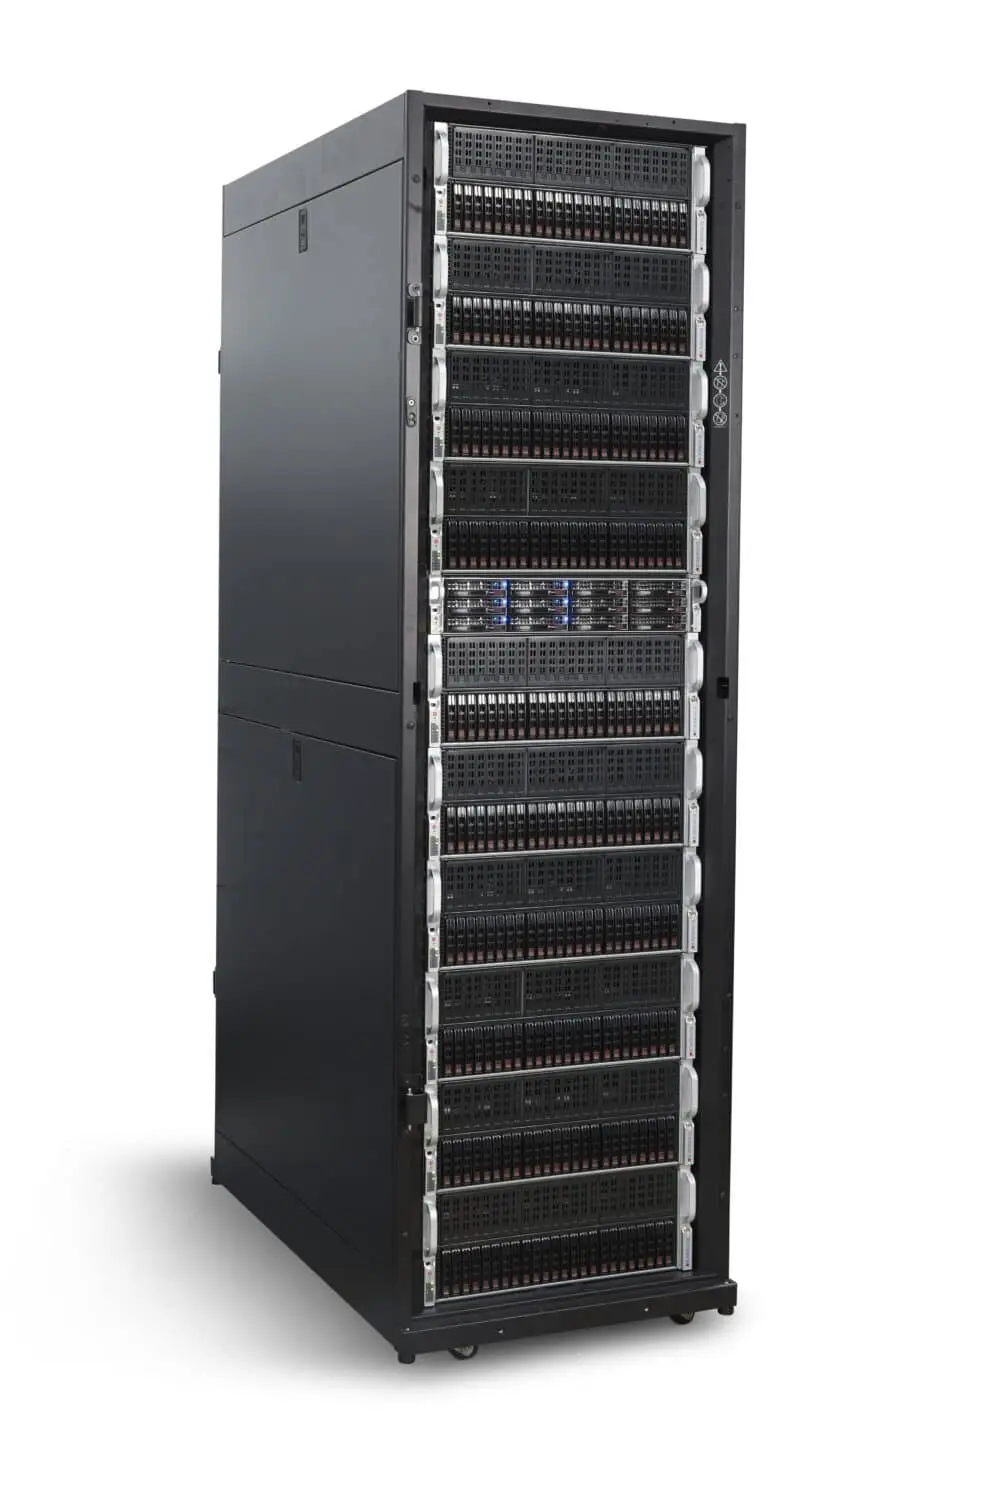 A black server rack with multiple racks showcasing technology products.